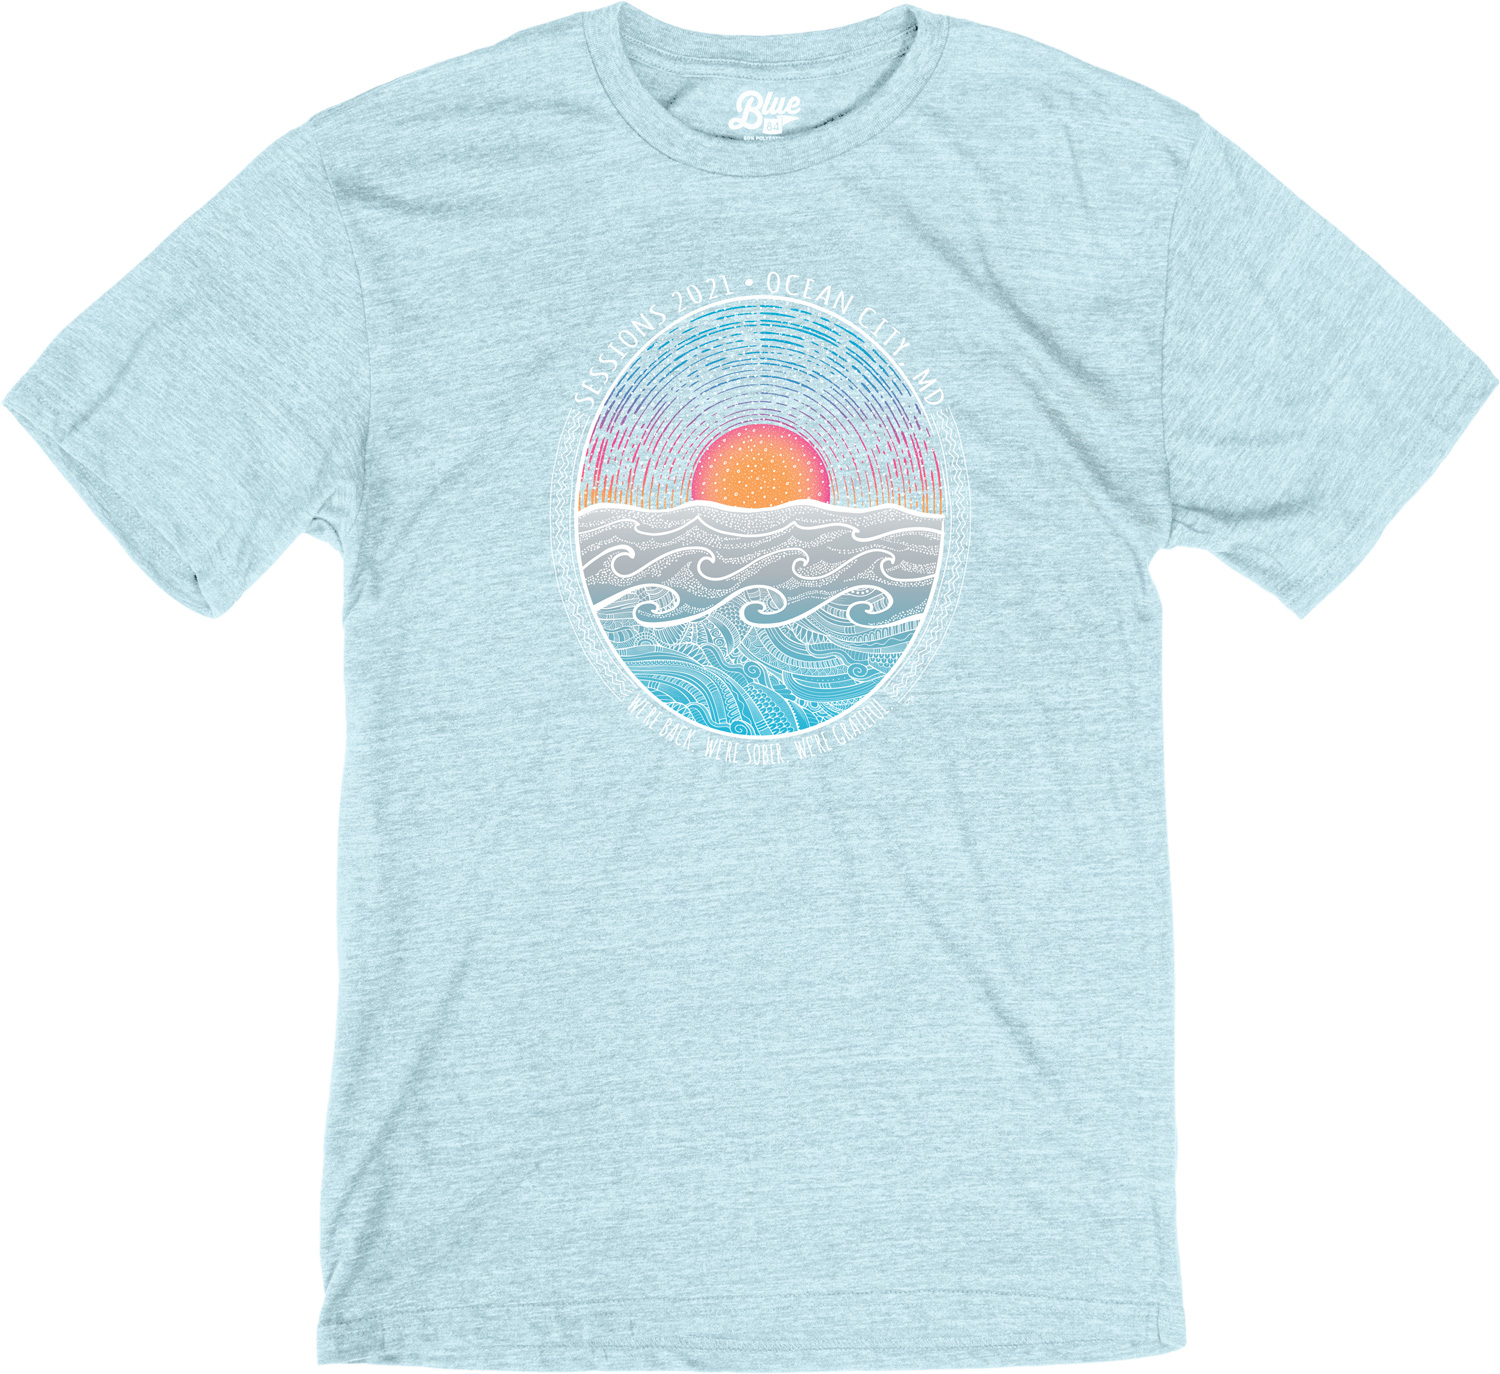 SESSIONS 2021 Tee - Wave and Sunset